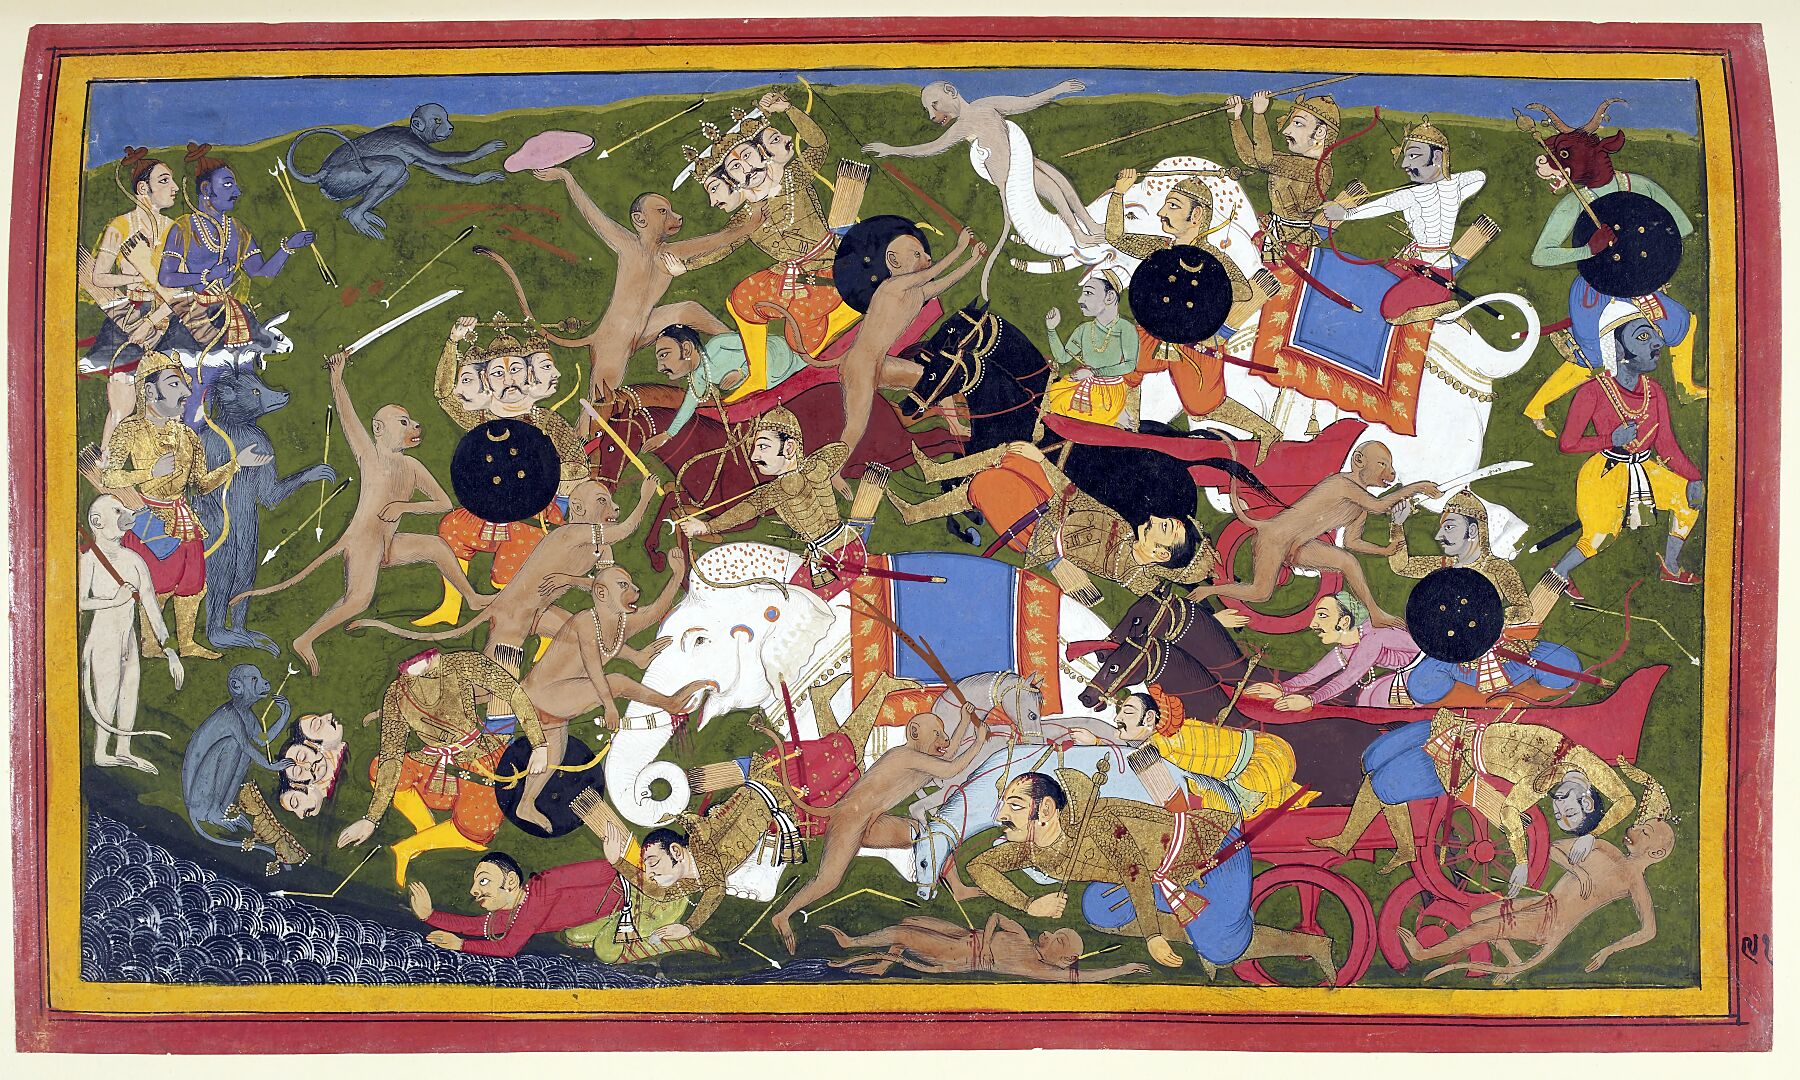 Battle at Lanka, between the armies of Rama and the King of Lanka, 1649-1653.